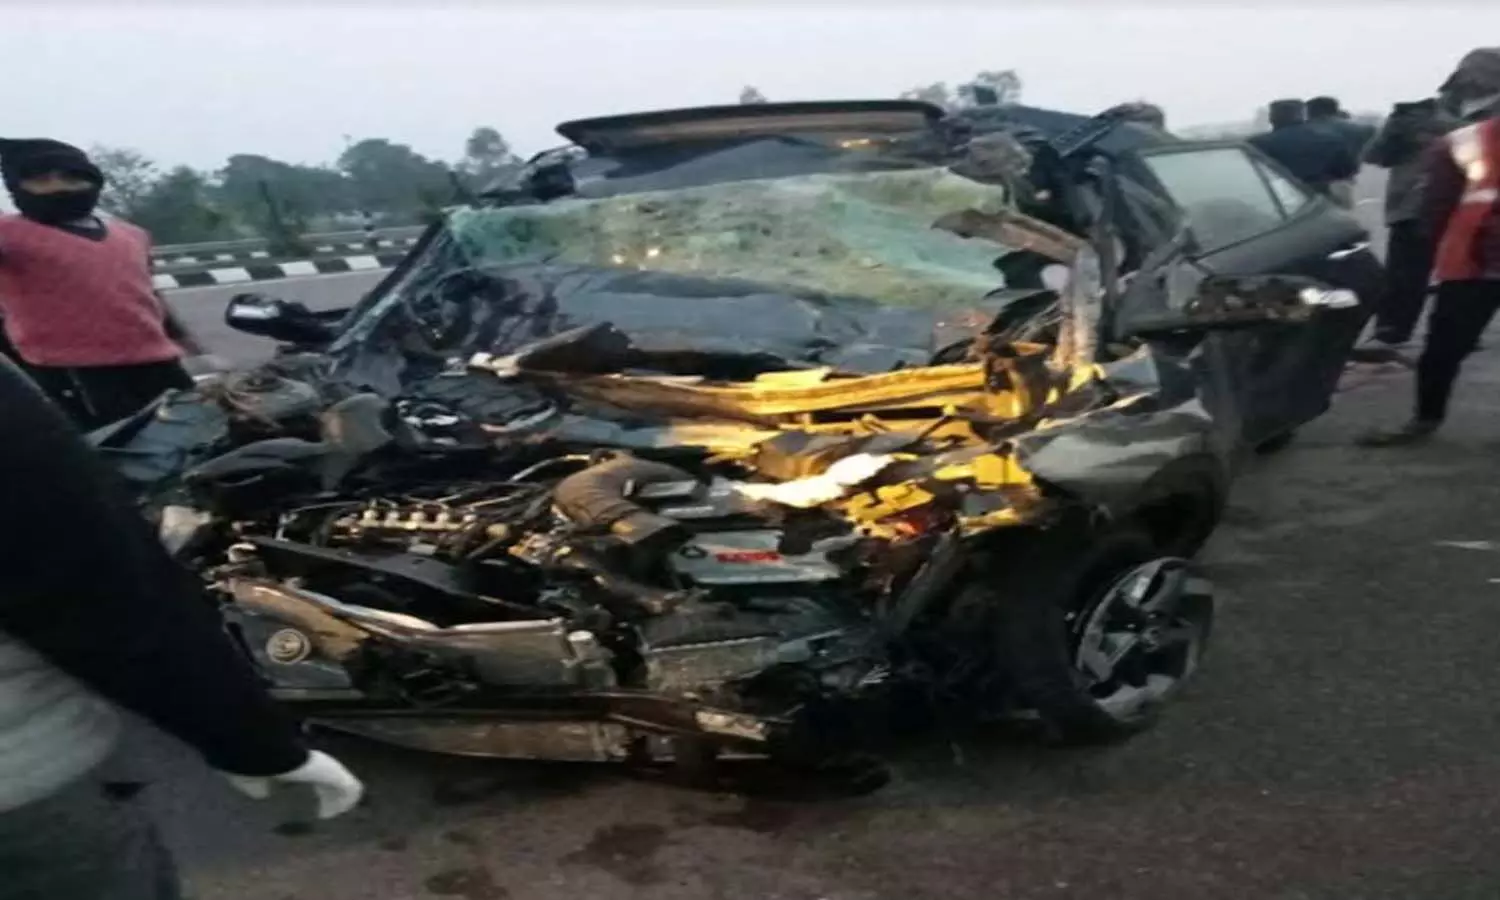 Unnao Car Accident News: Car rams into trailer on Agra Lucknow Expressway, 3 killed